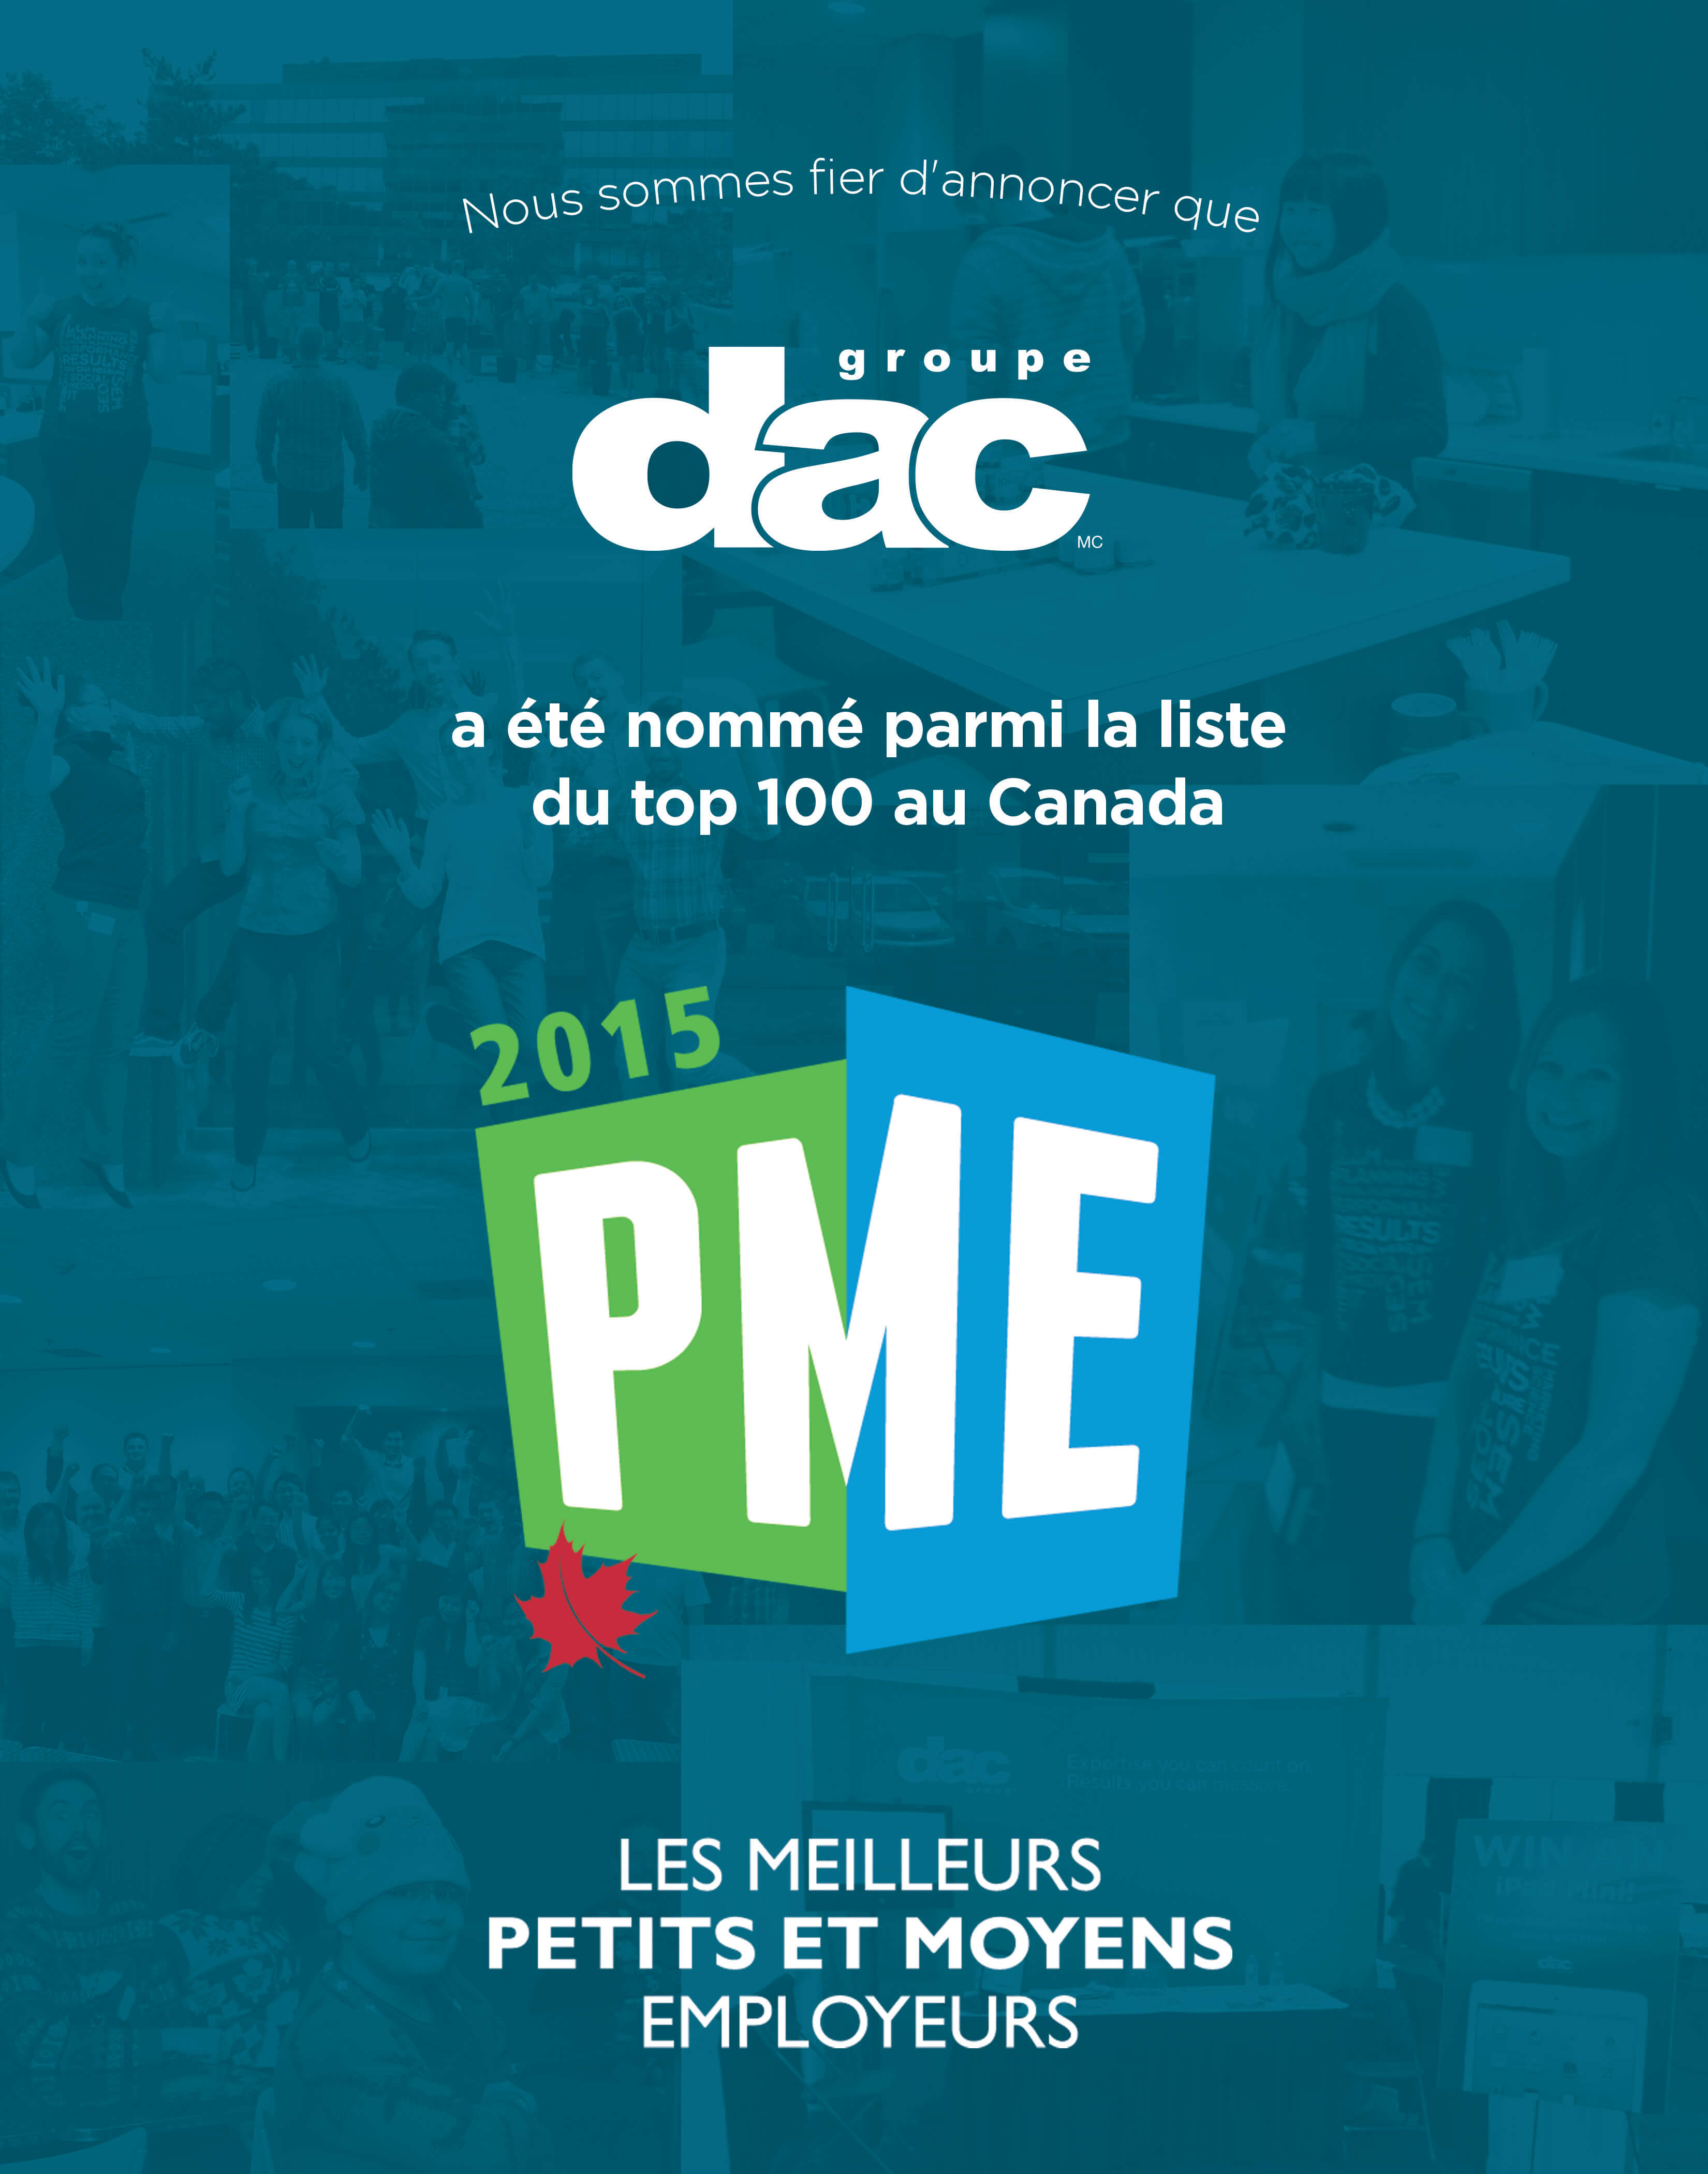 DAC Awarded One of Canada’s Top SMEs for 2015